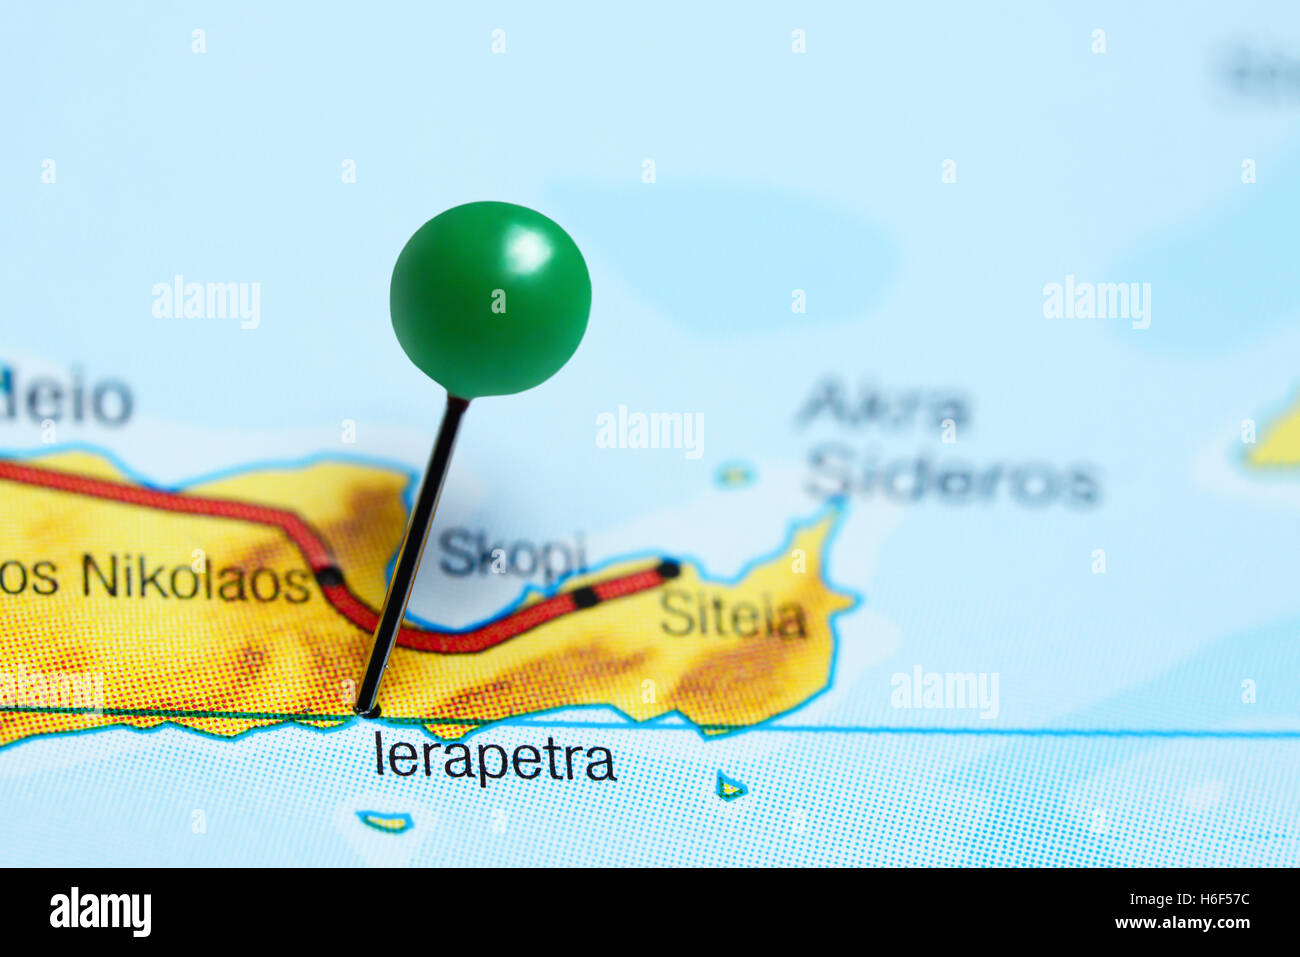 Ierapetra pinned on a map of Greece Stock Photo